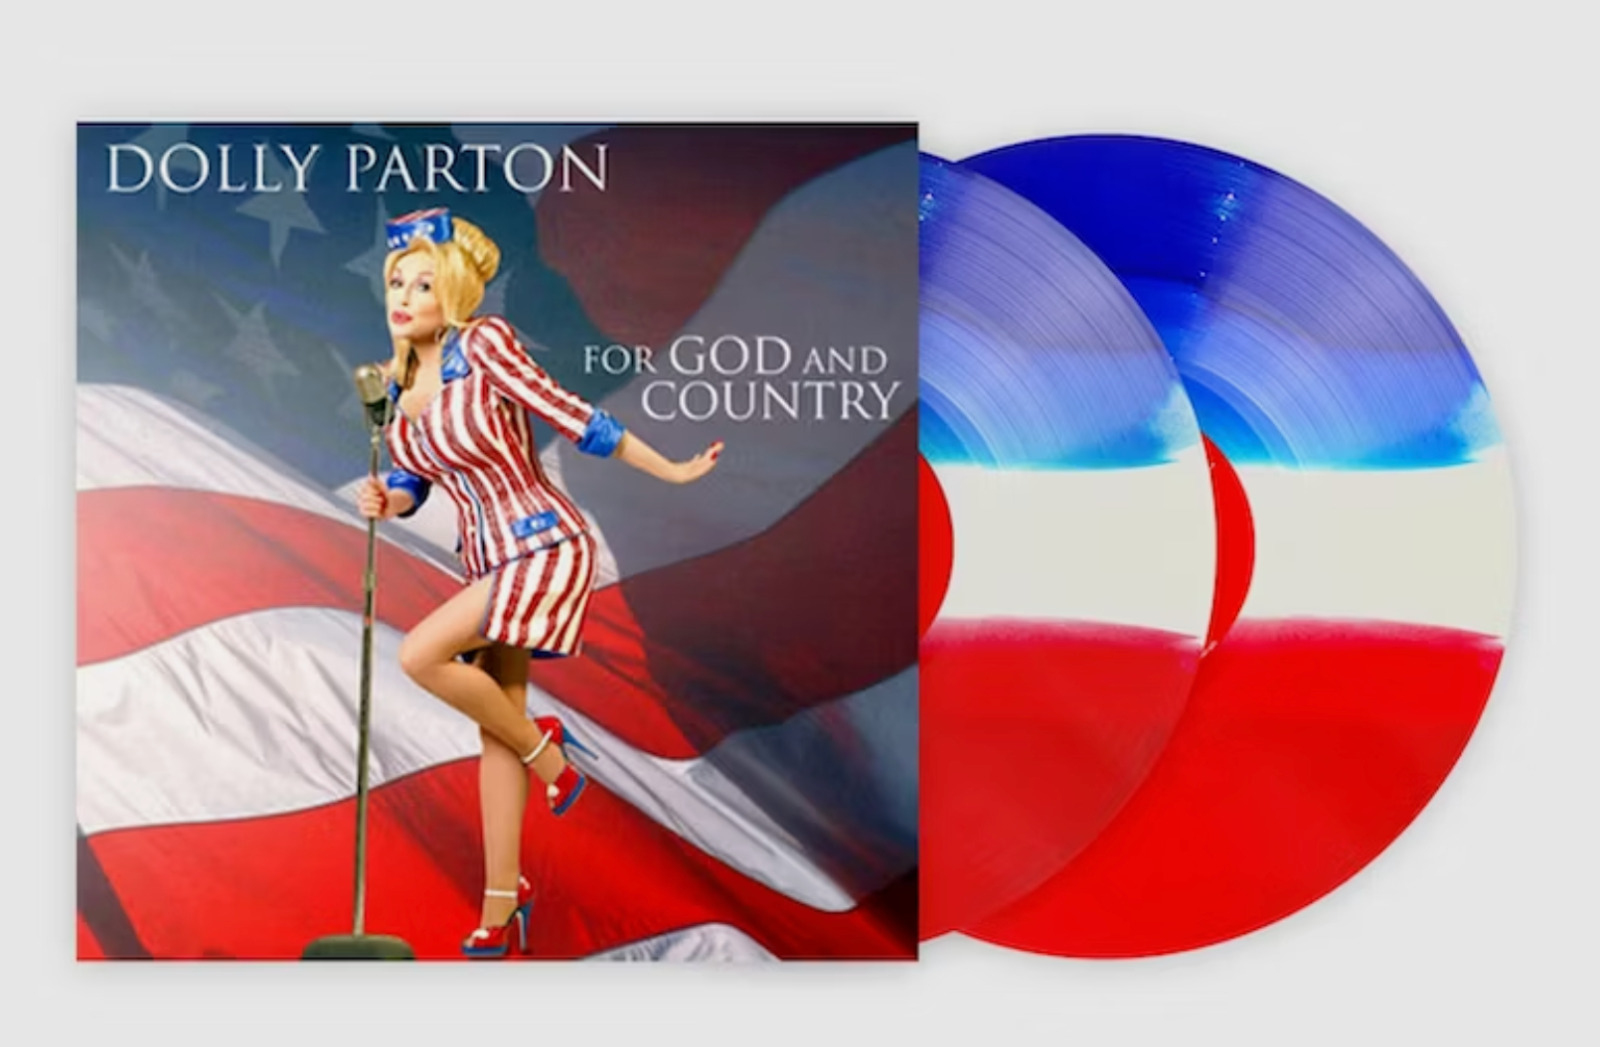 DOLLY PARTON FOR GOD AND COUNTRY VINYL NEW LIMITED 2000 RED WHITE BLUE LP ****